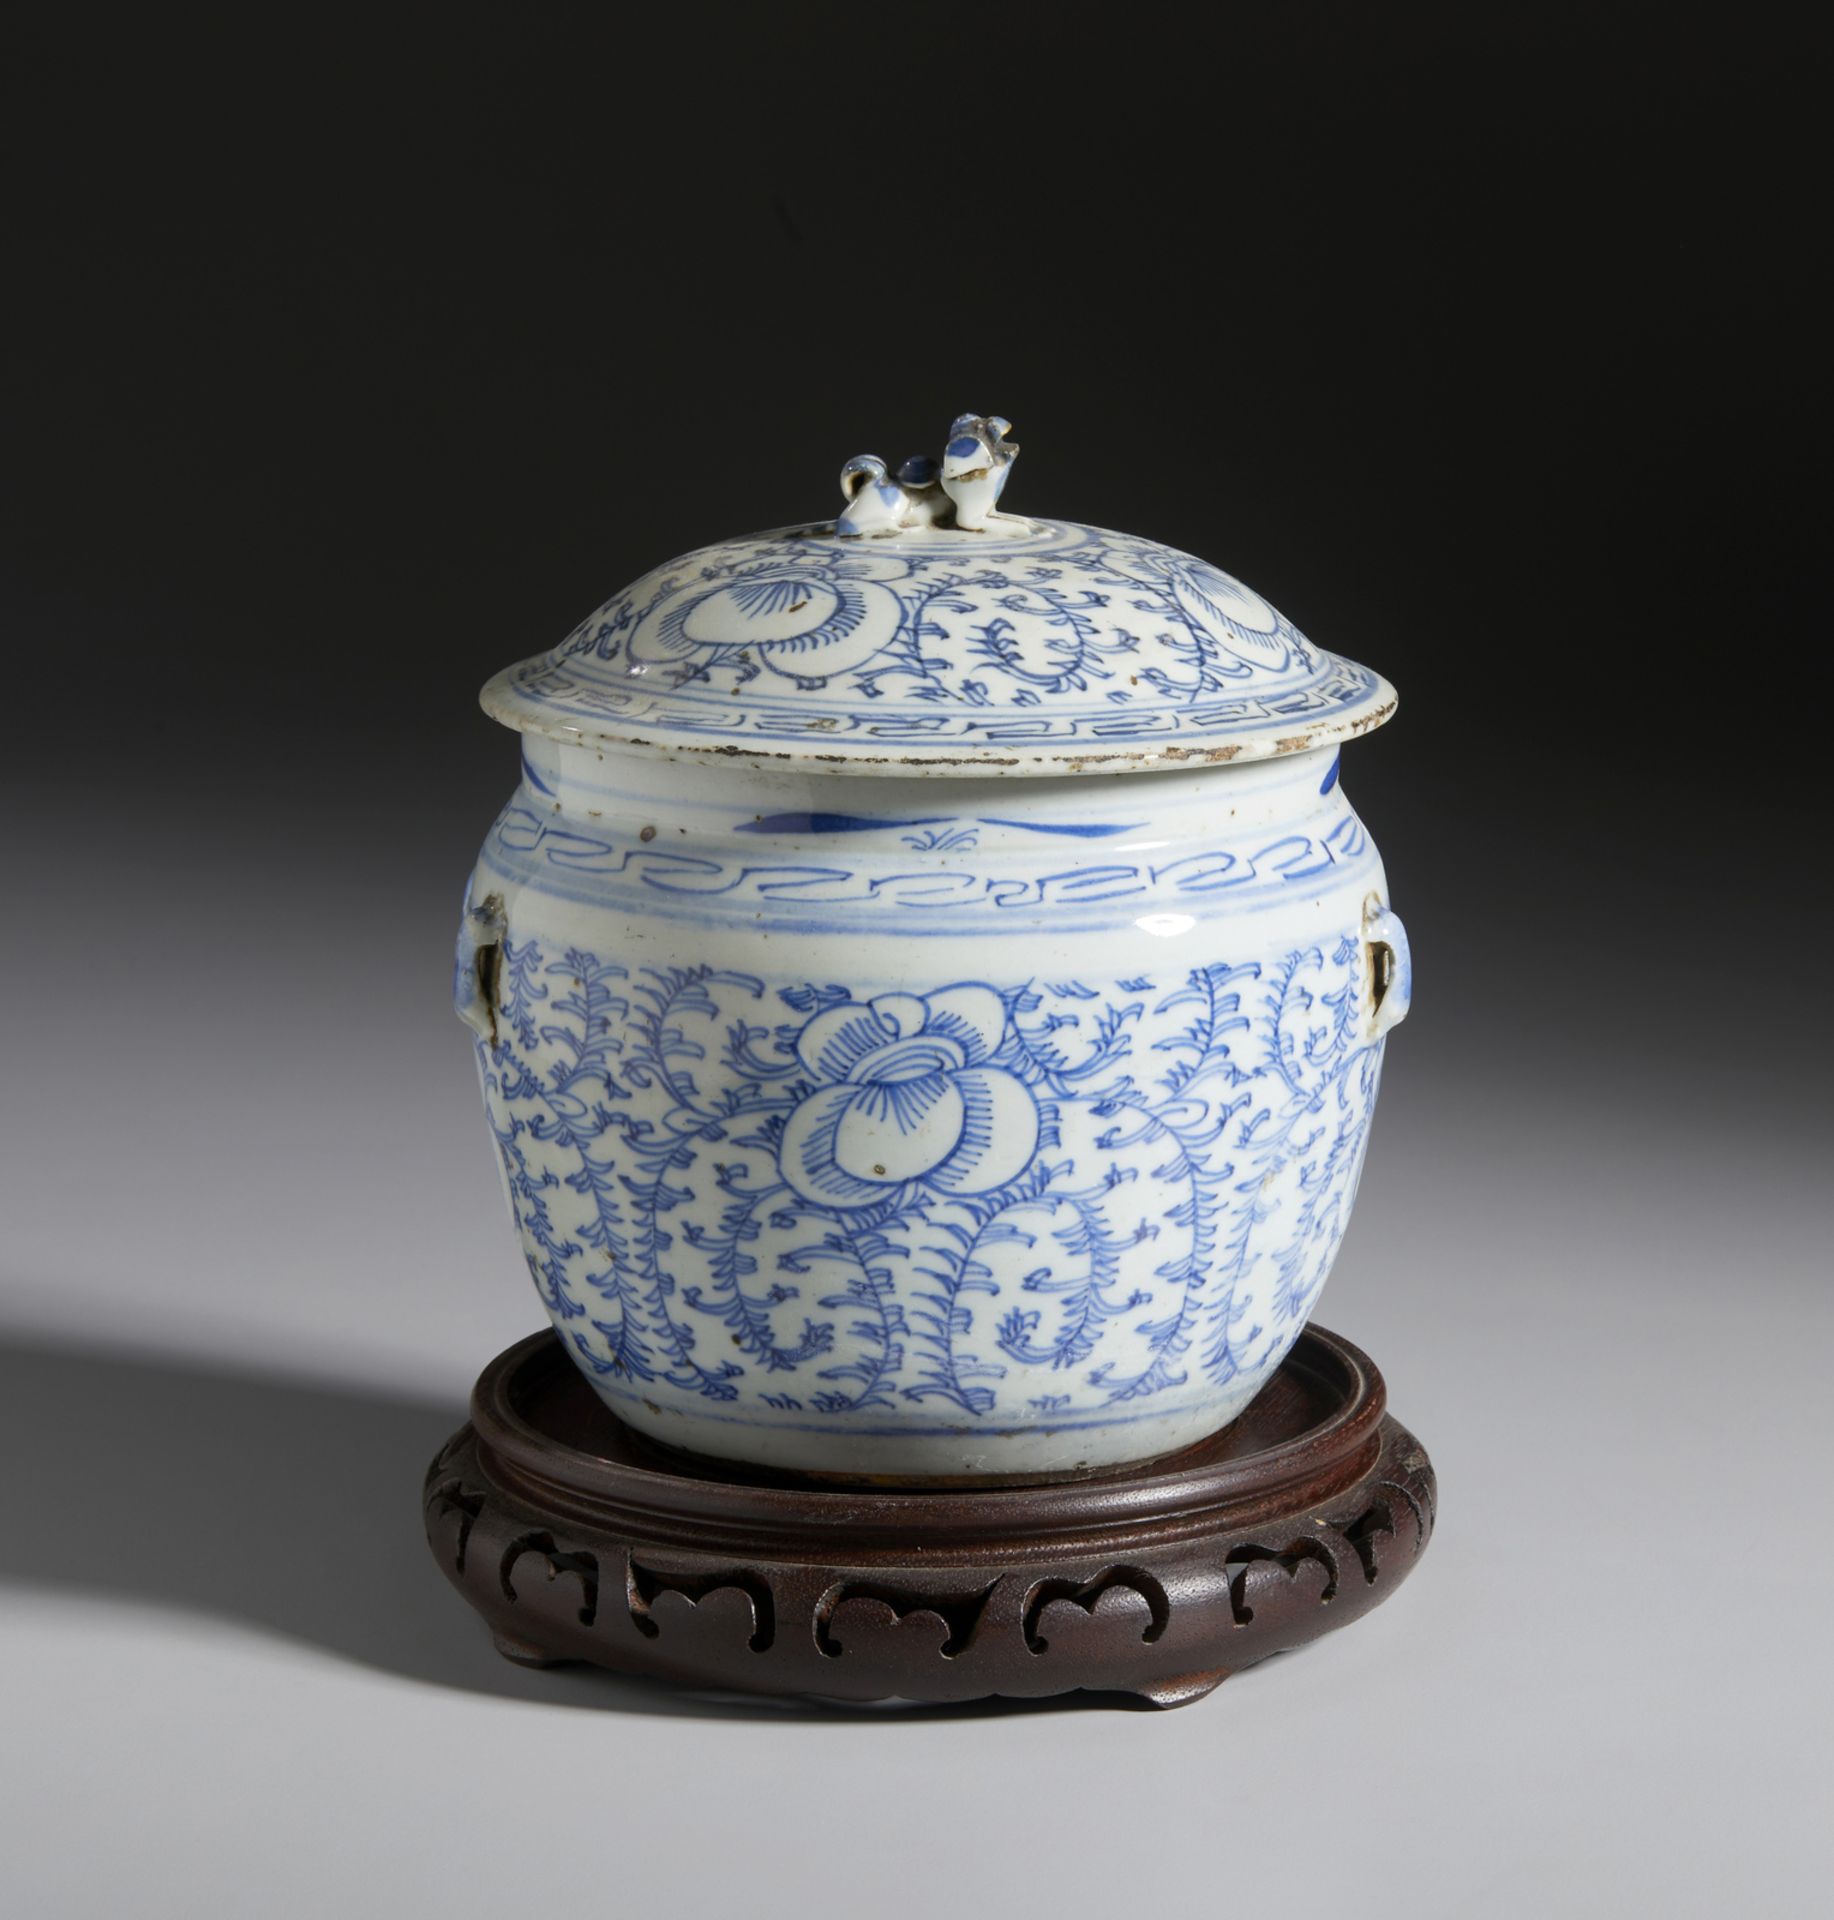 A blue and white porcelain storage jar China, Qing dynasty, 18th century Cm 19,50 x 22,50